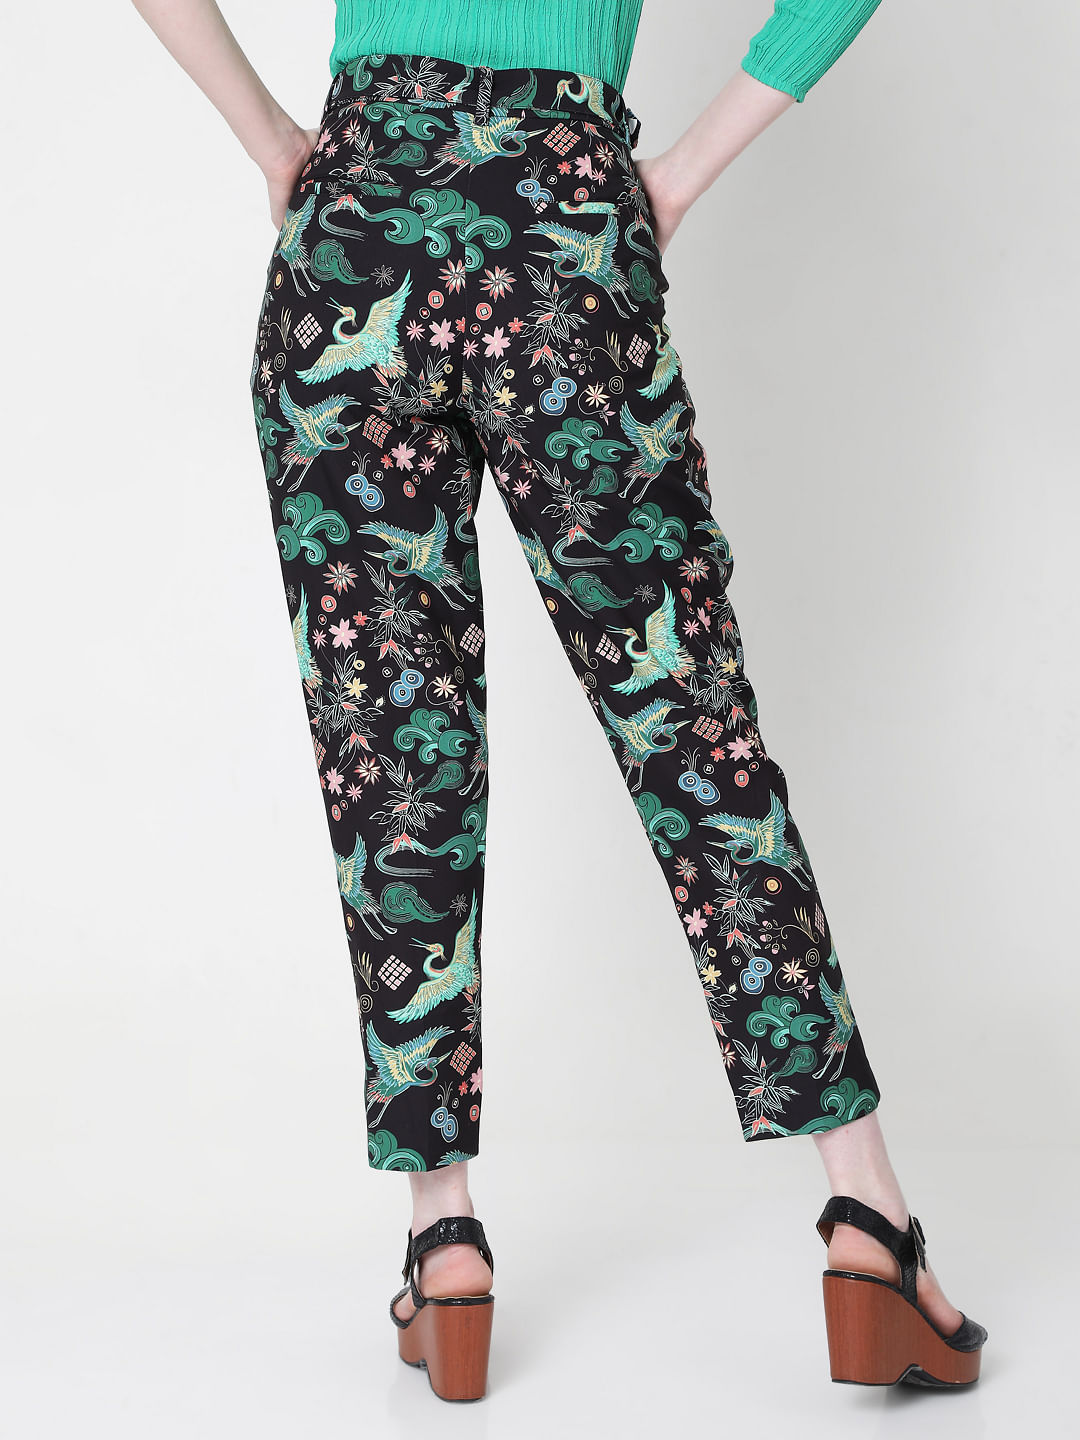 Marks & Spencer Printed Trousers for Women sale - discounted price |  FASHIOLA INDIA